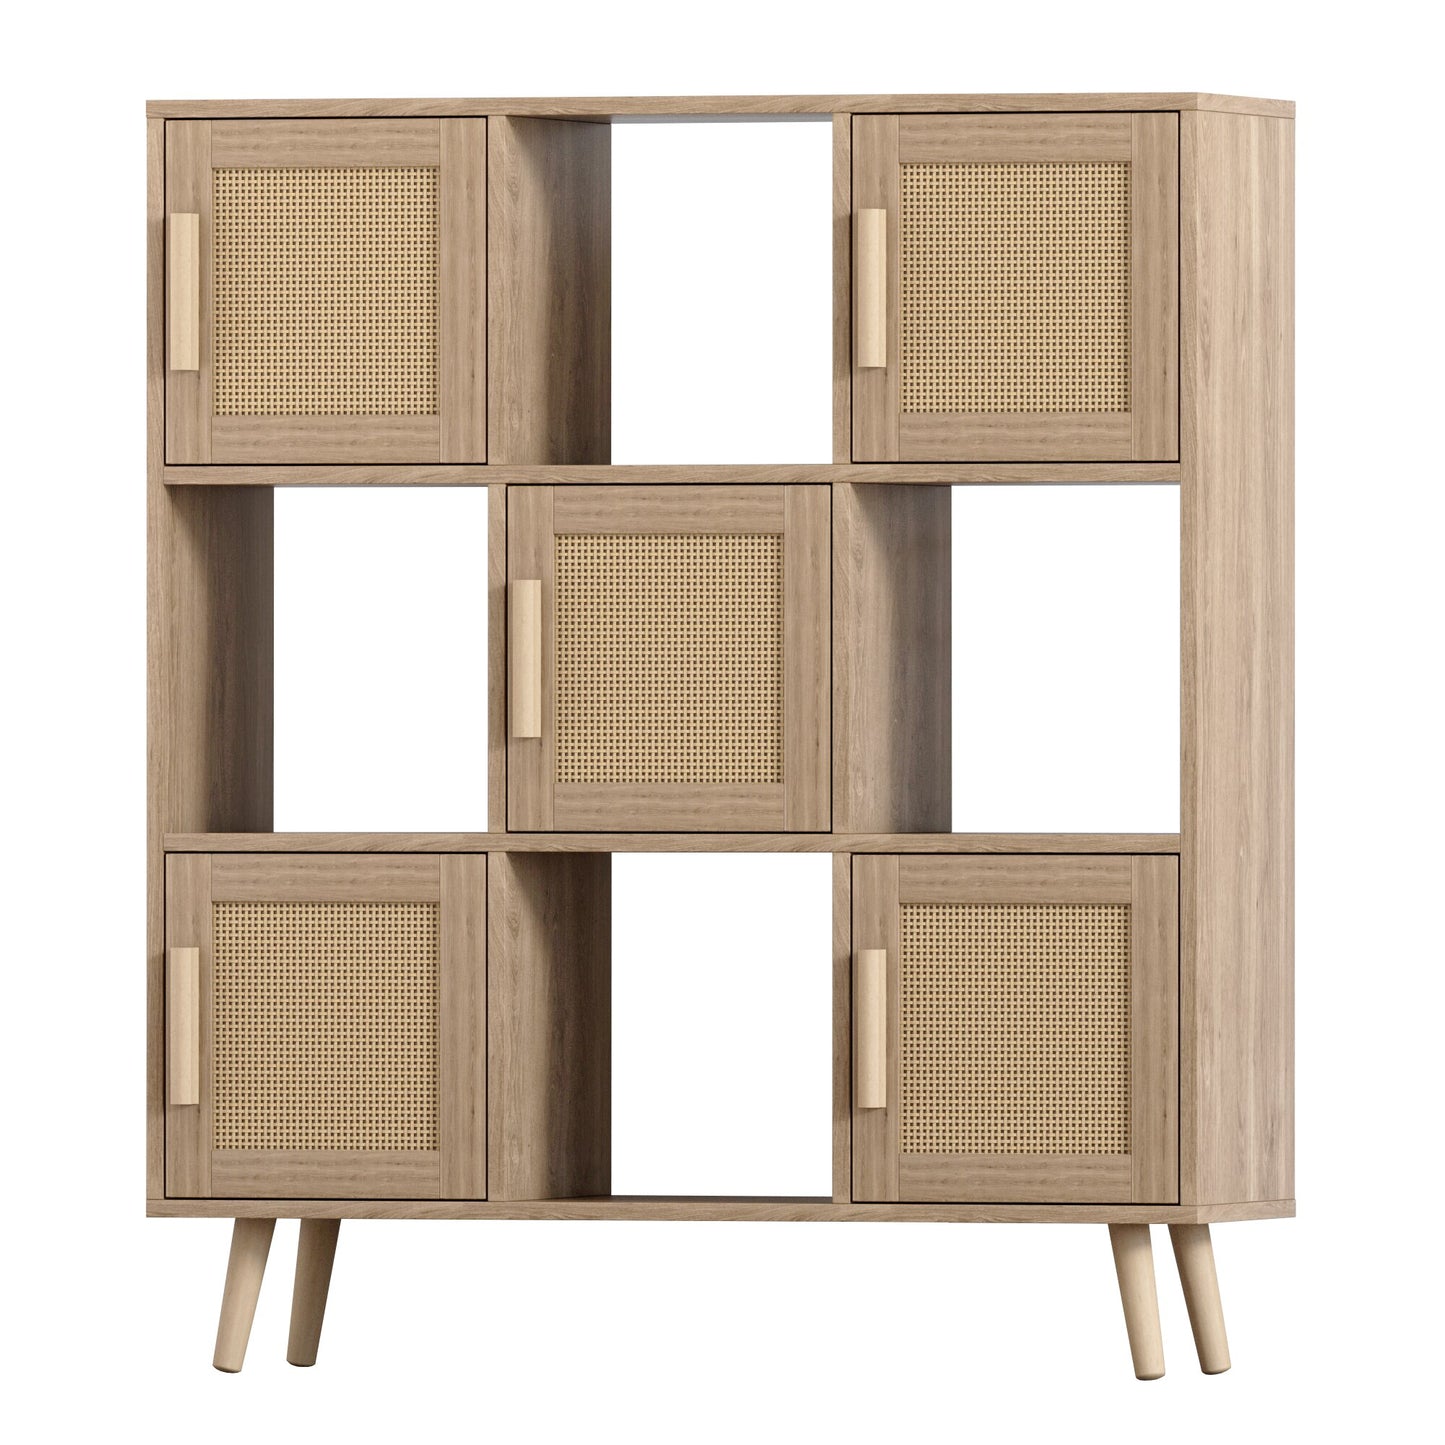 9-Cube Organizer, Storage Cabinet W/4 Open Cubes & 5 Cabinets Free Standing Wooden Cubby Bookcase Compartment Units[US-Stock]